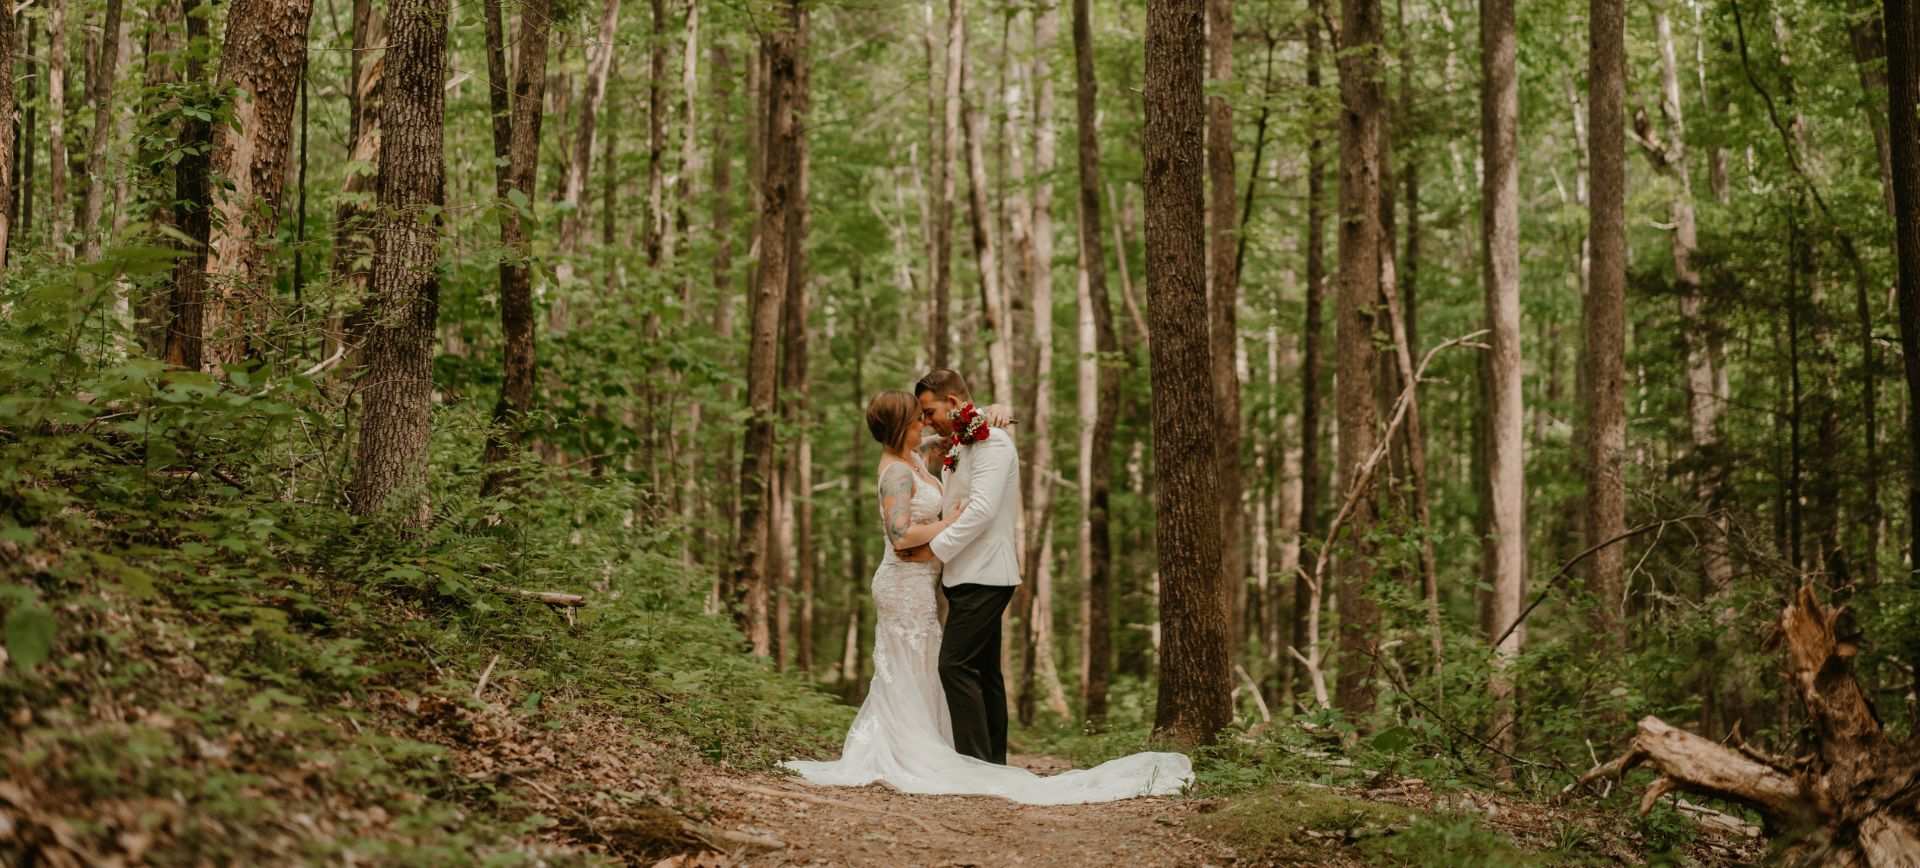 great smoky mountains elopement in tennessee